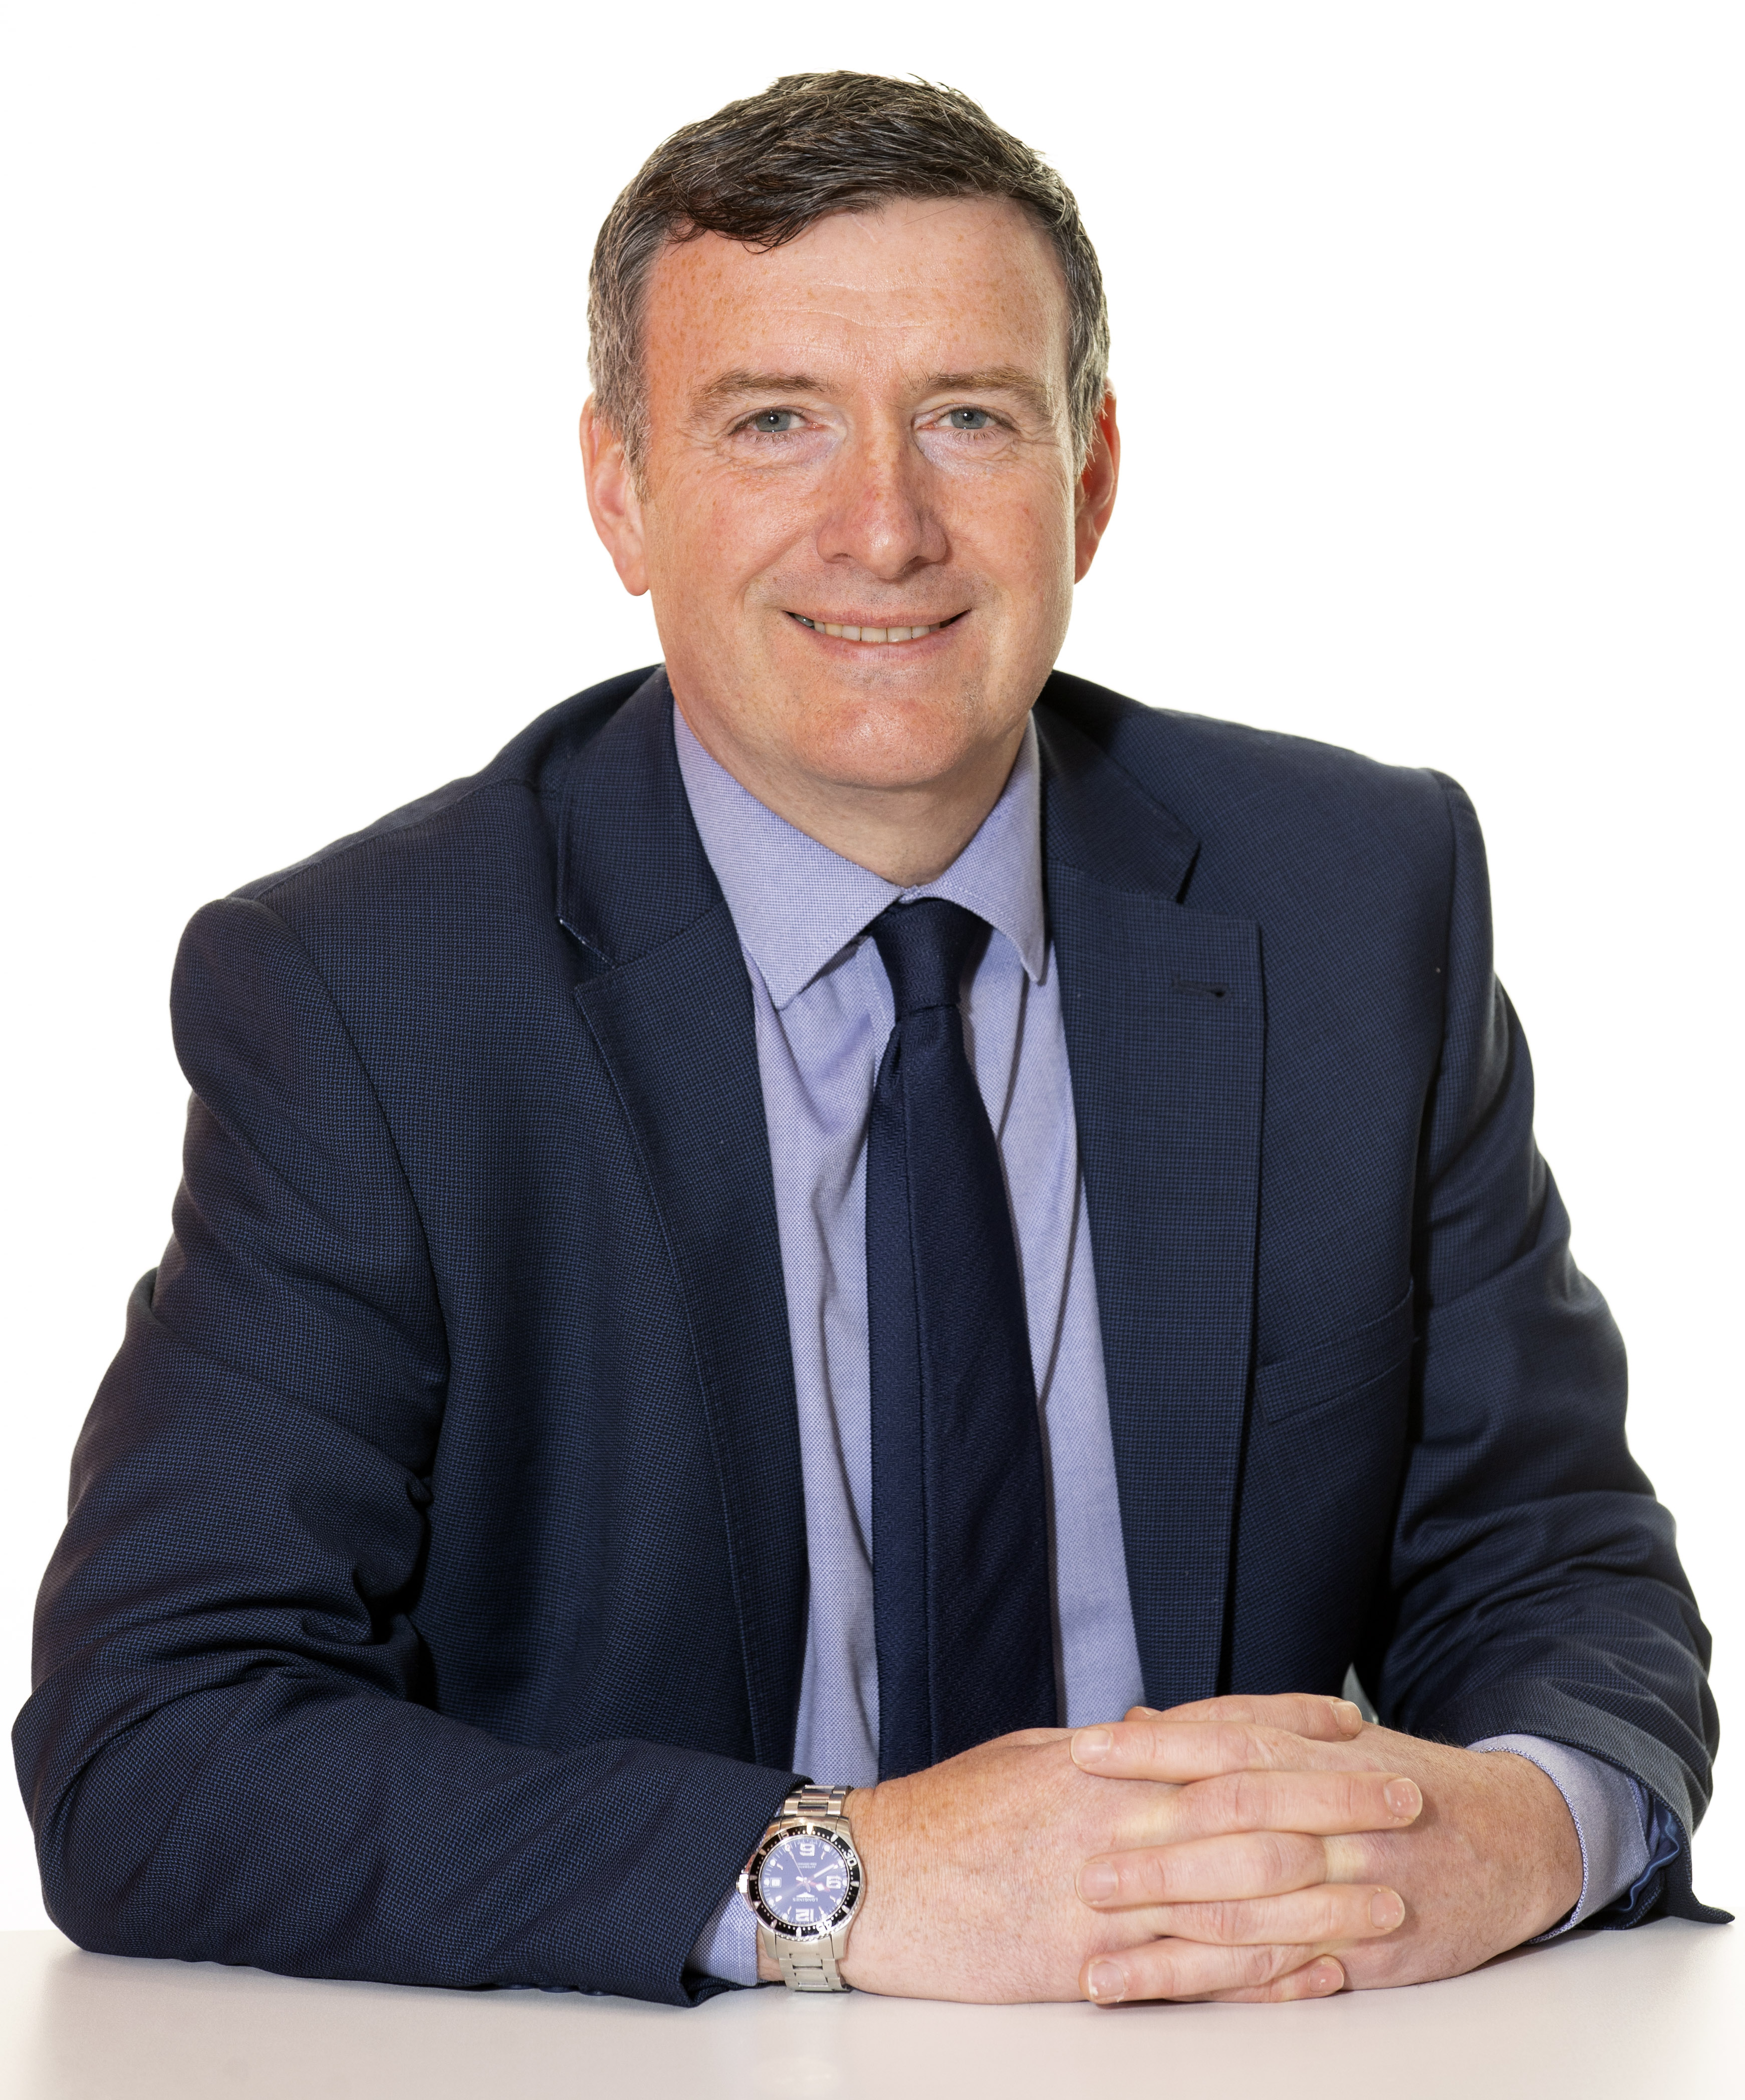 Wheatley Group appoints Frank McCafferty to new senior role